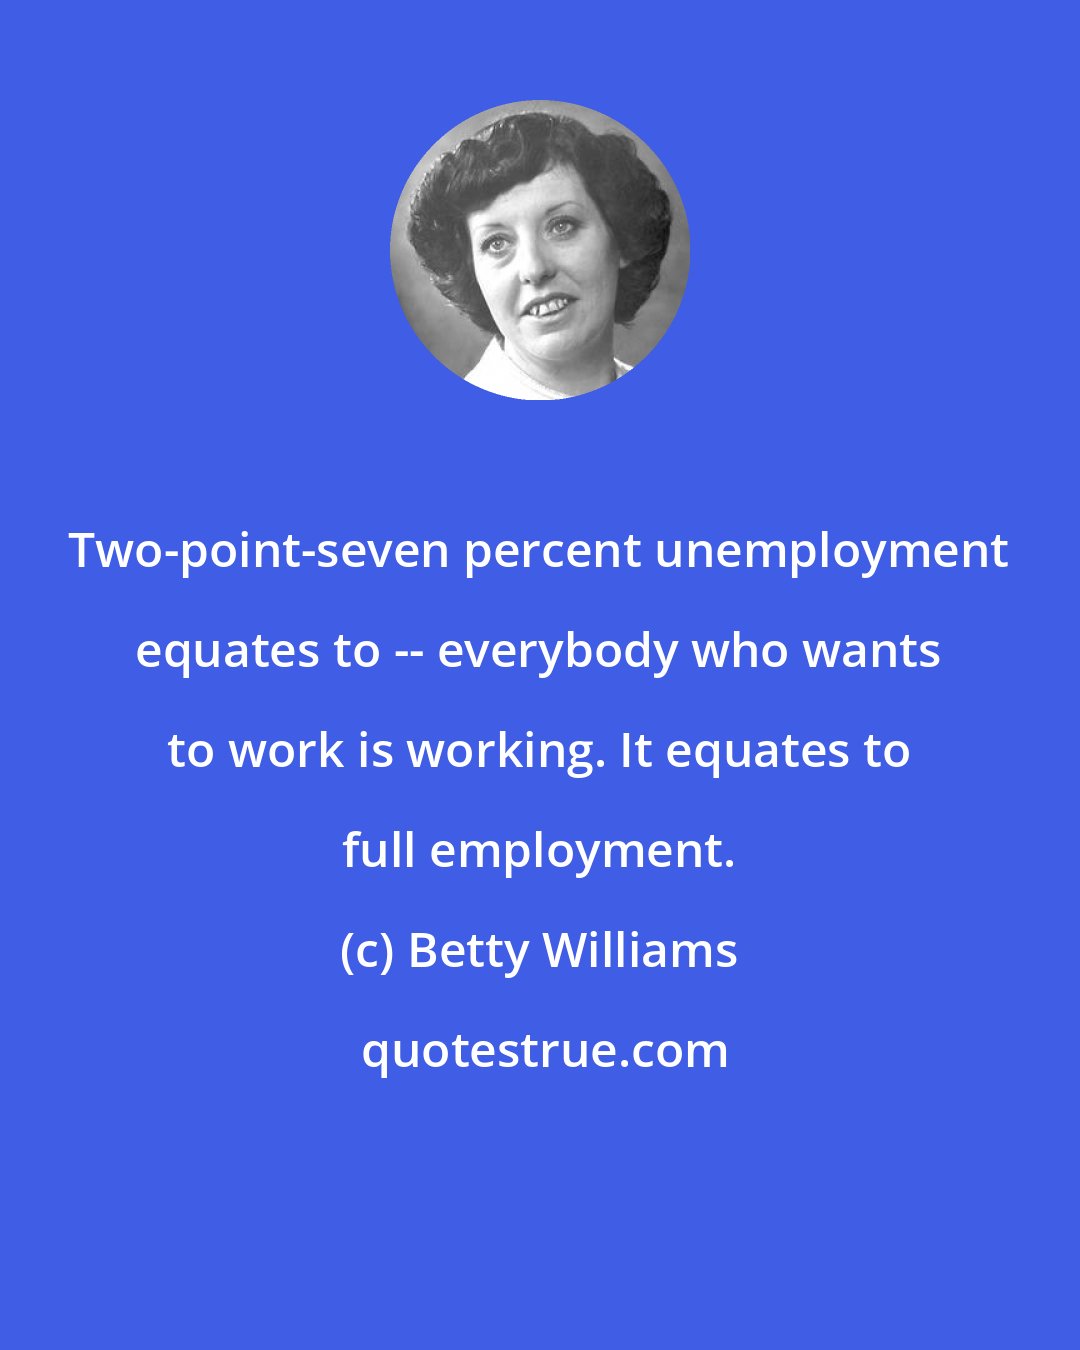 Betty Williams: Two-point-seven percent unemployment equates to -- everybody who wants to work is working. It equates to full employment.